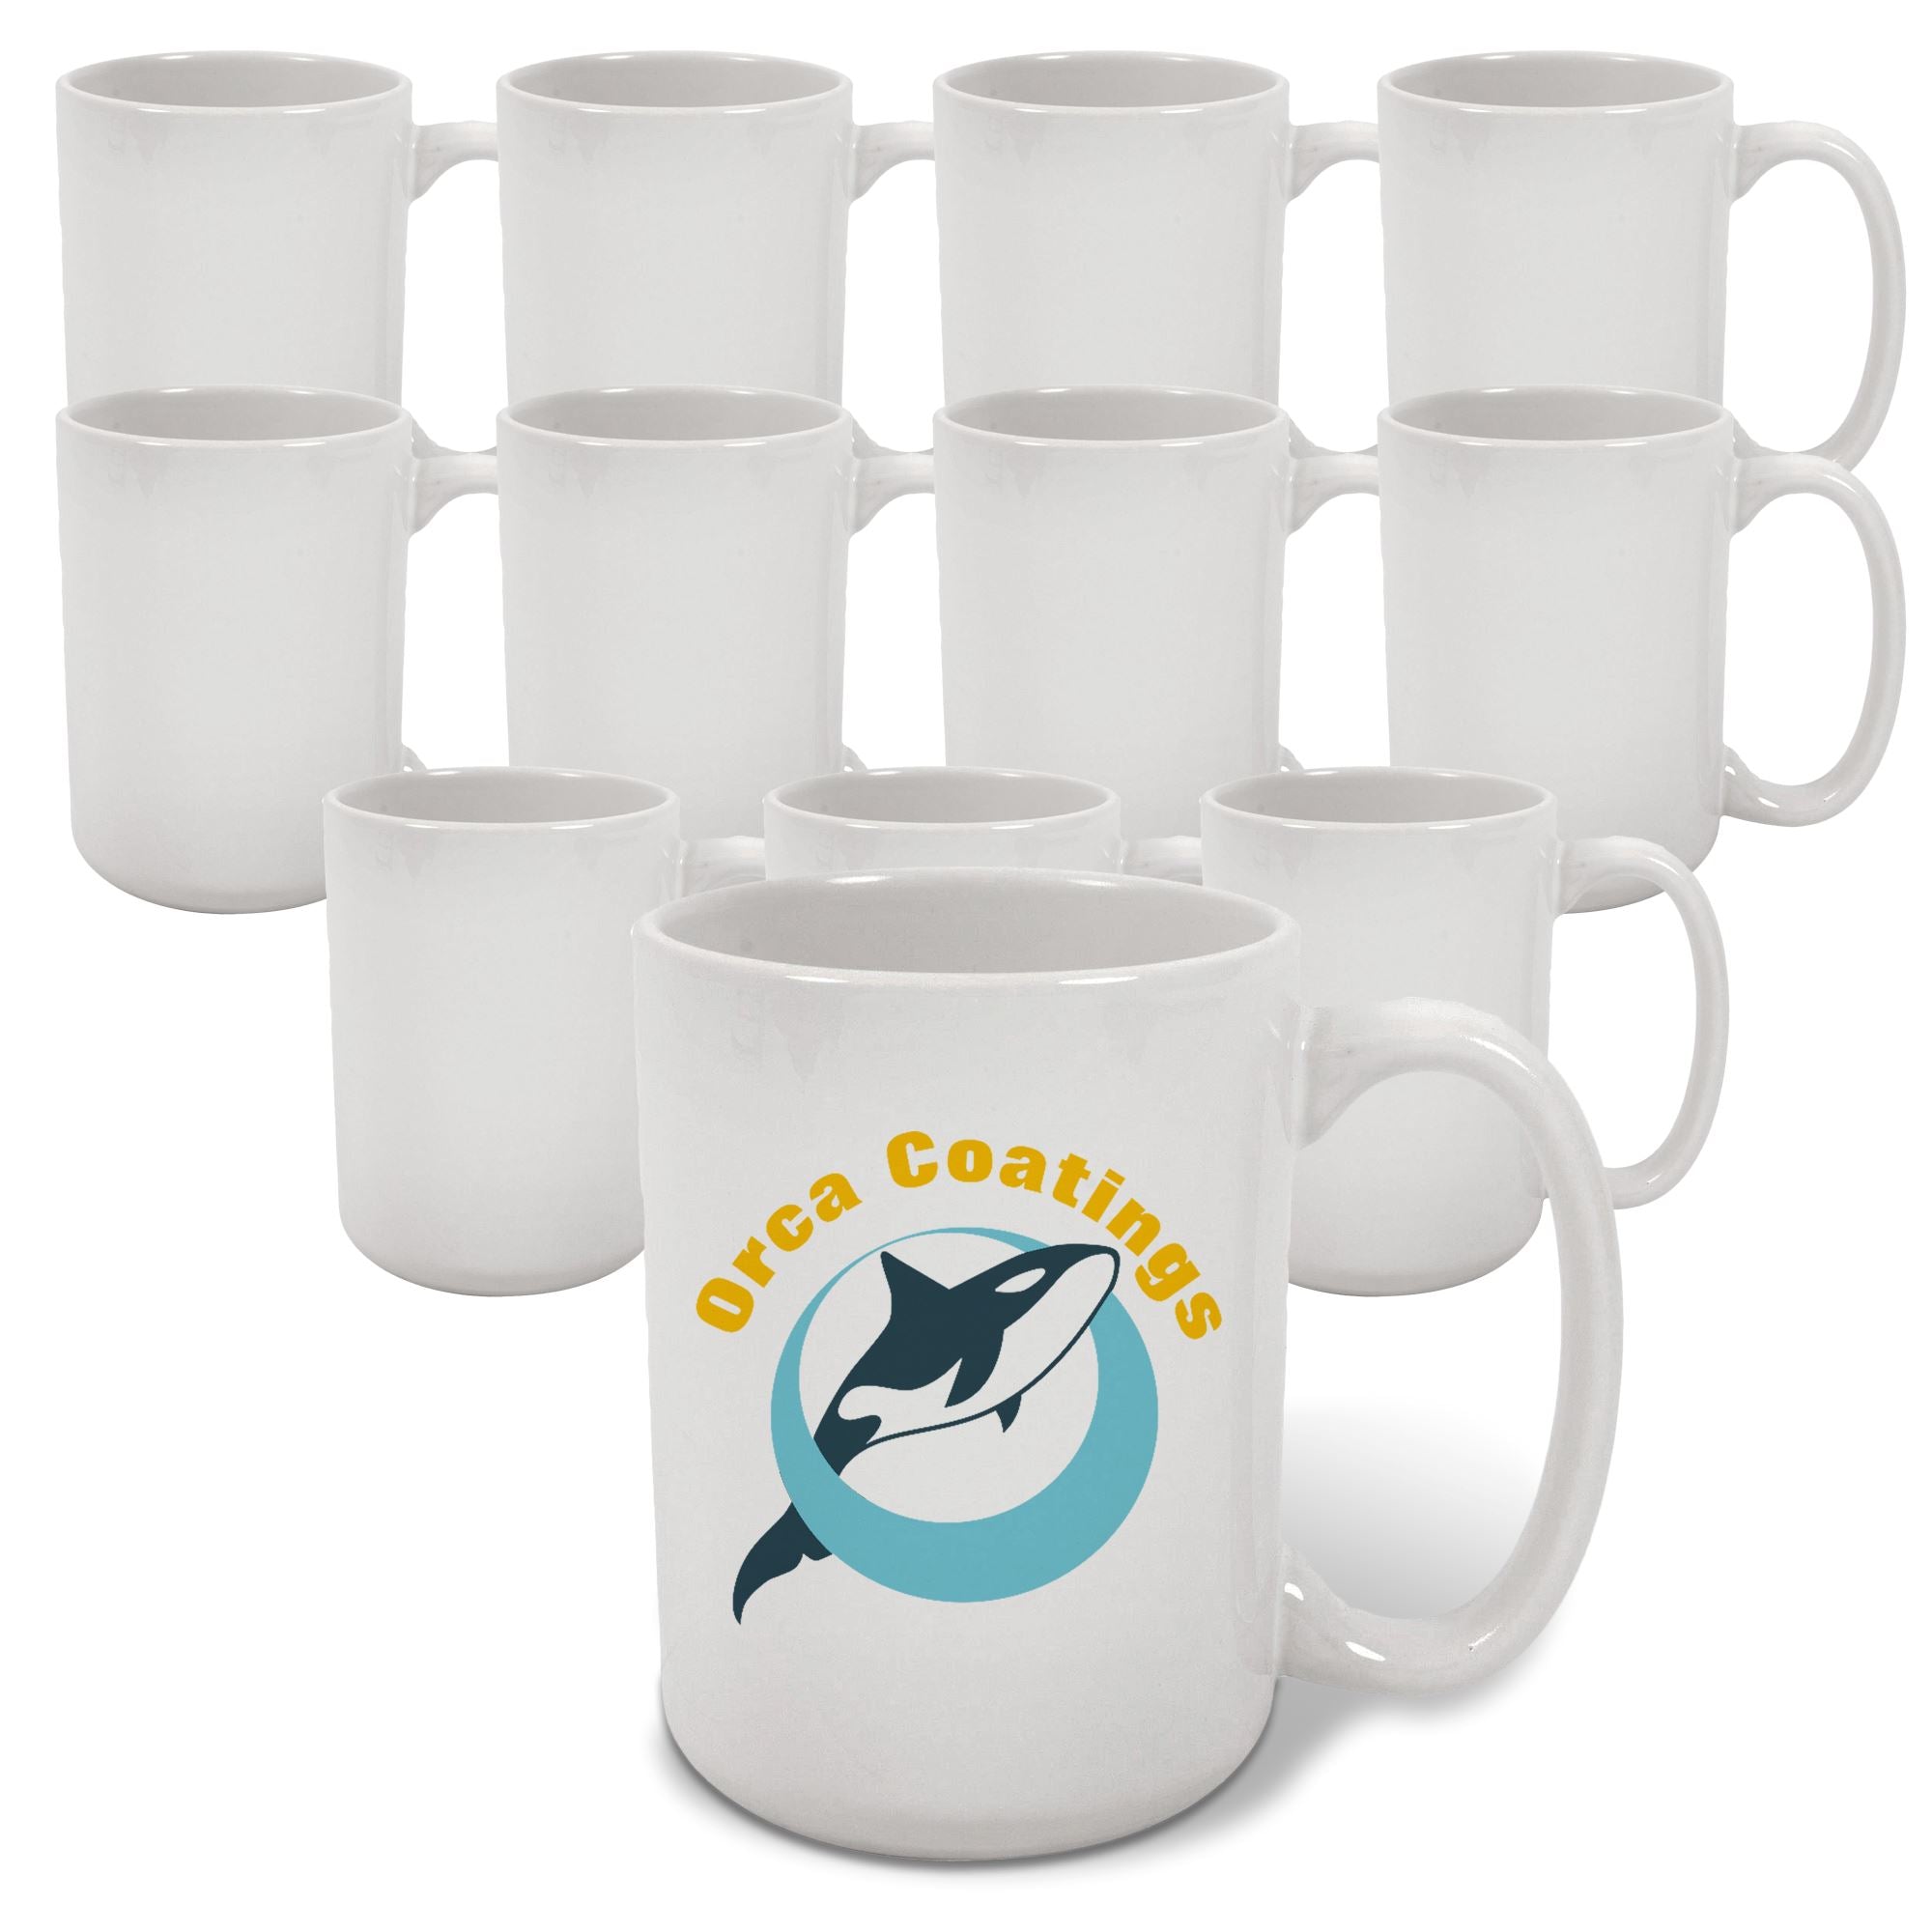 https://cdn.shopify.com/s/files/1/0224/5205/products/15oz-orca-aaa-ceramic-white-sublimation-mug-blanks-72-pack-sublimation-swing-design-661674.jpg?v=1643390846